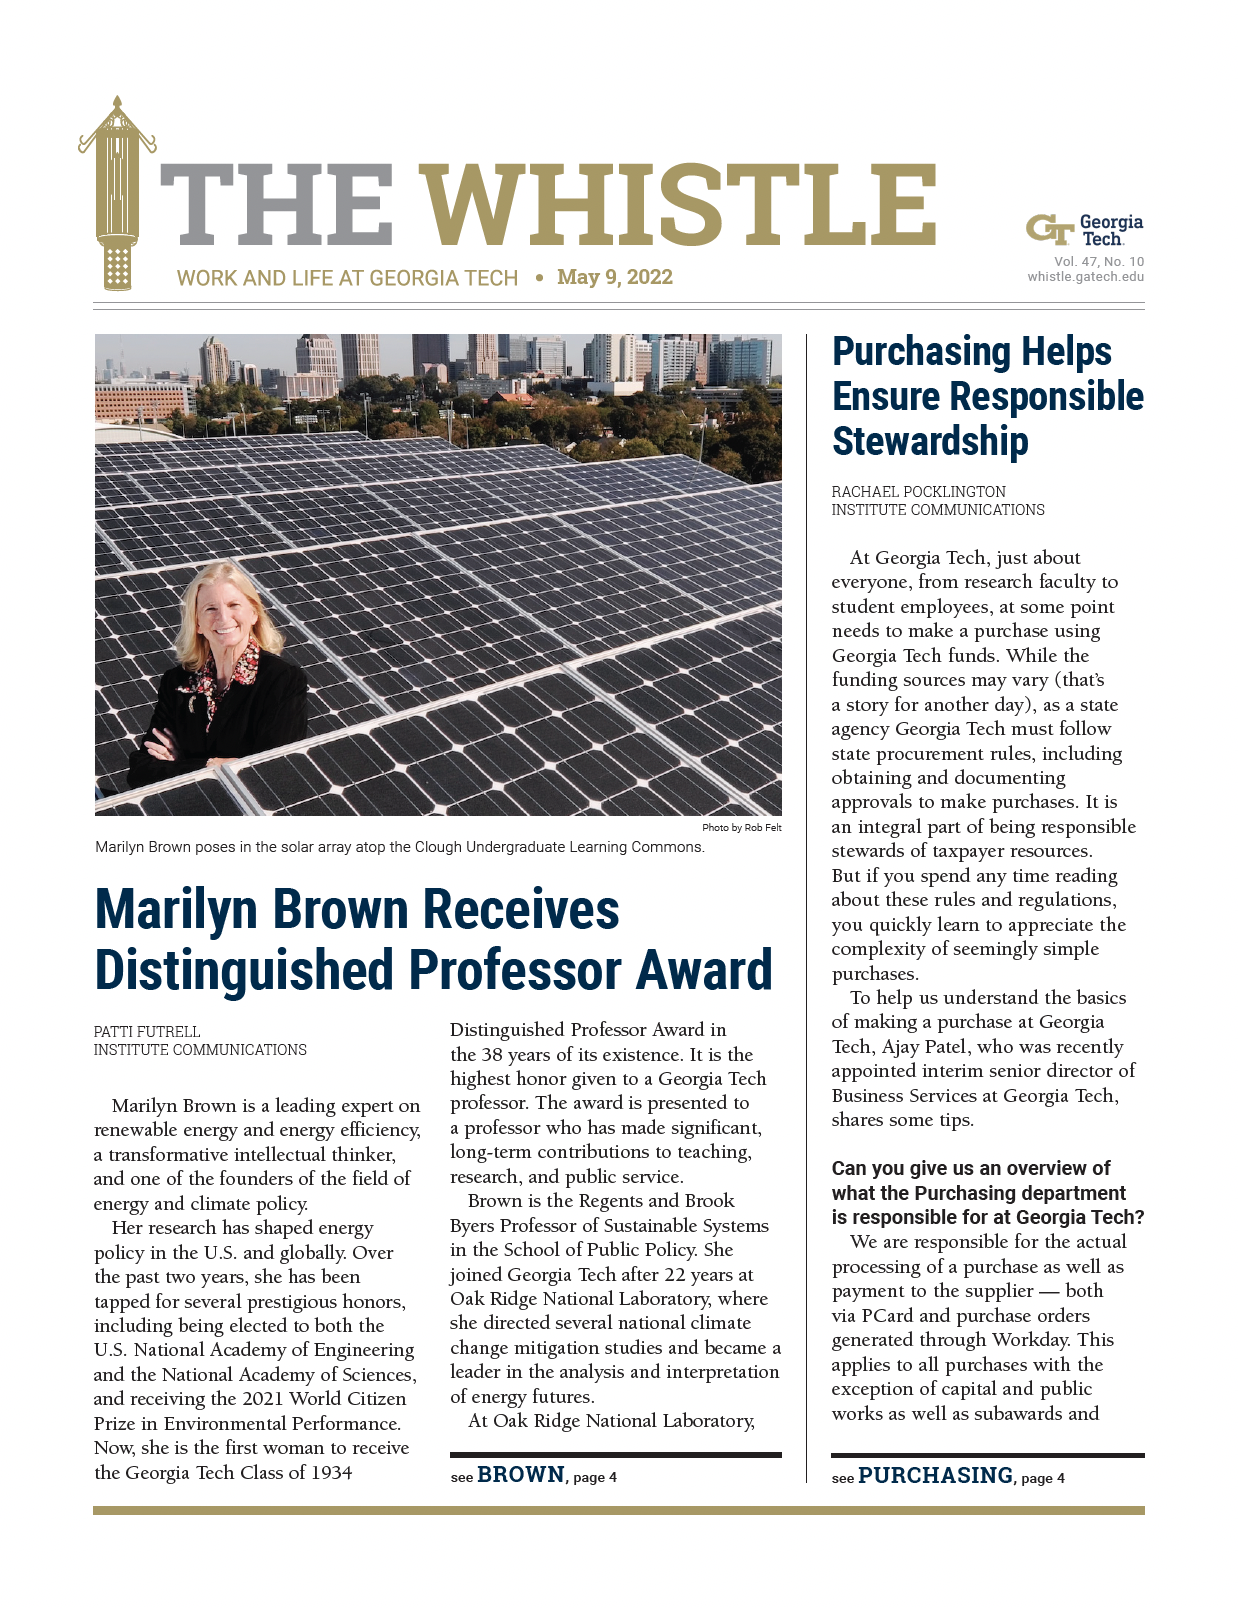 The Whistle - May 9, 2022